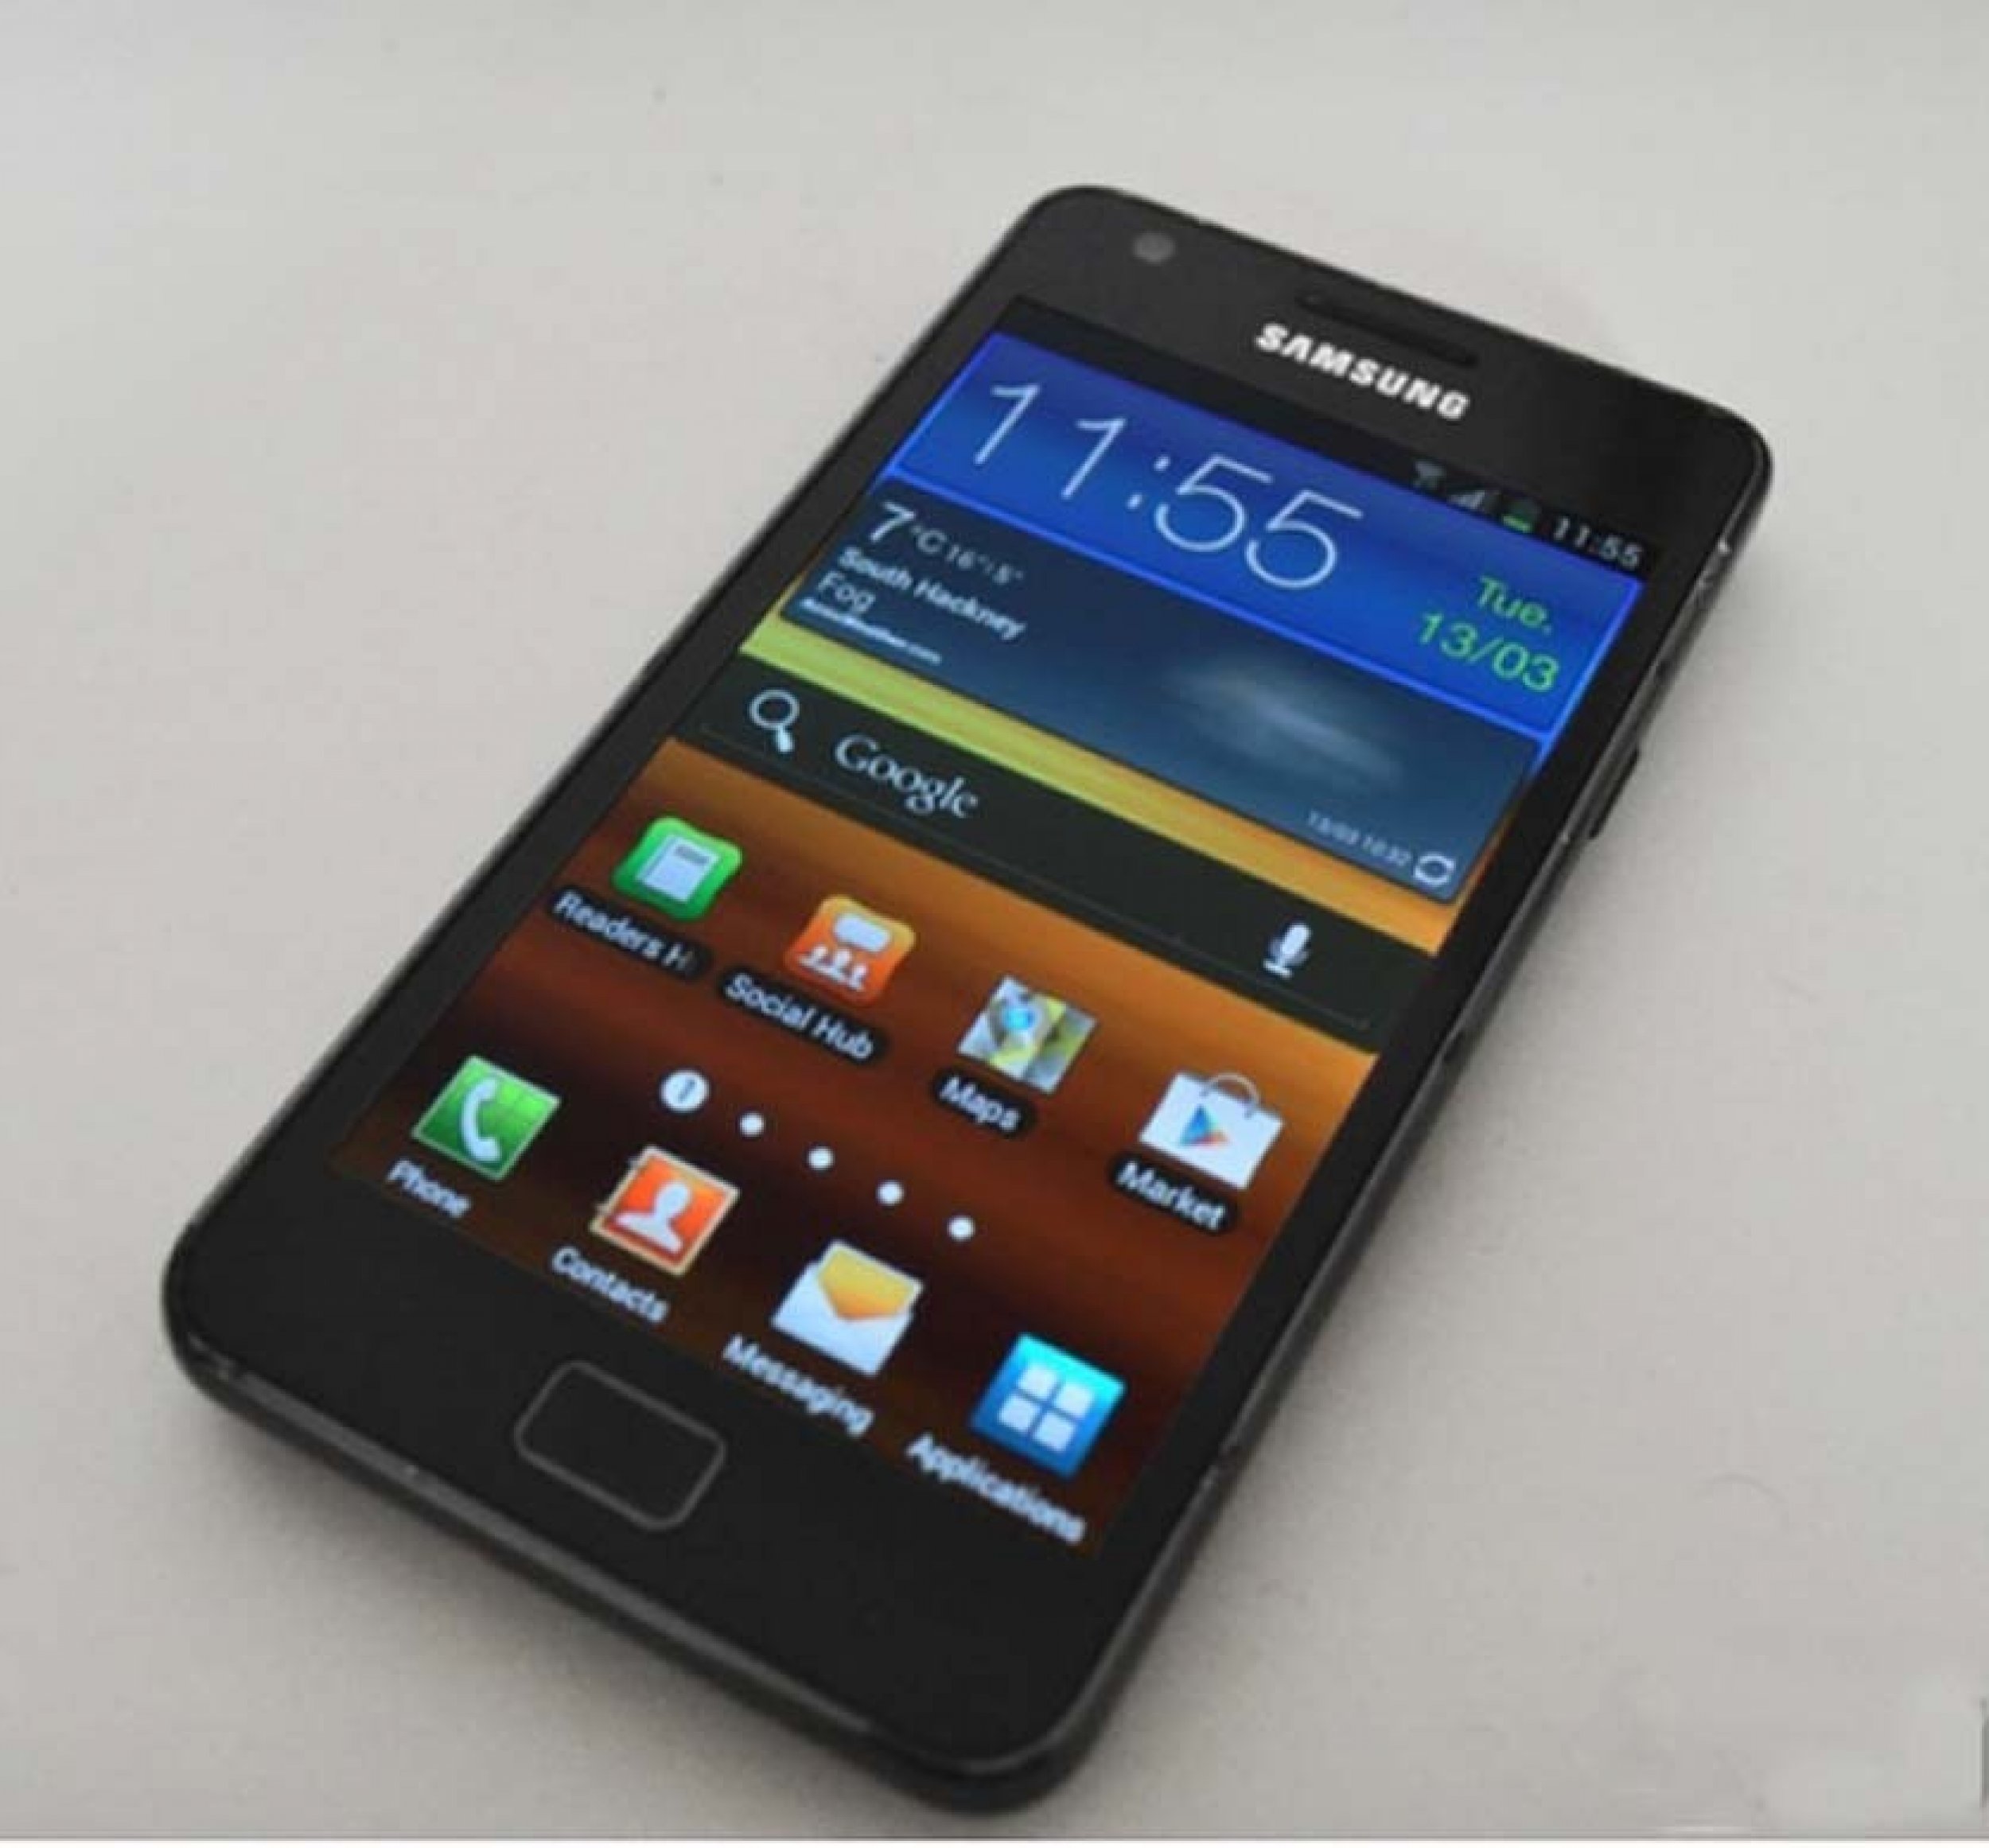 Samsung Galaxy S2 Android 4.2.2 Jelly Bean